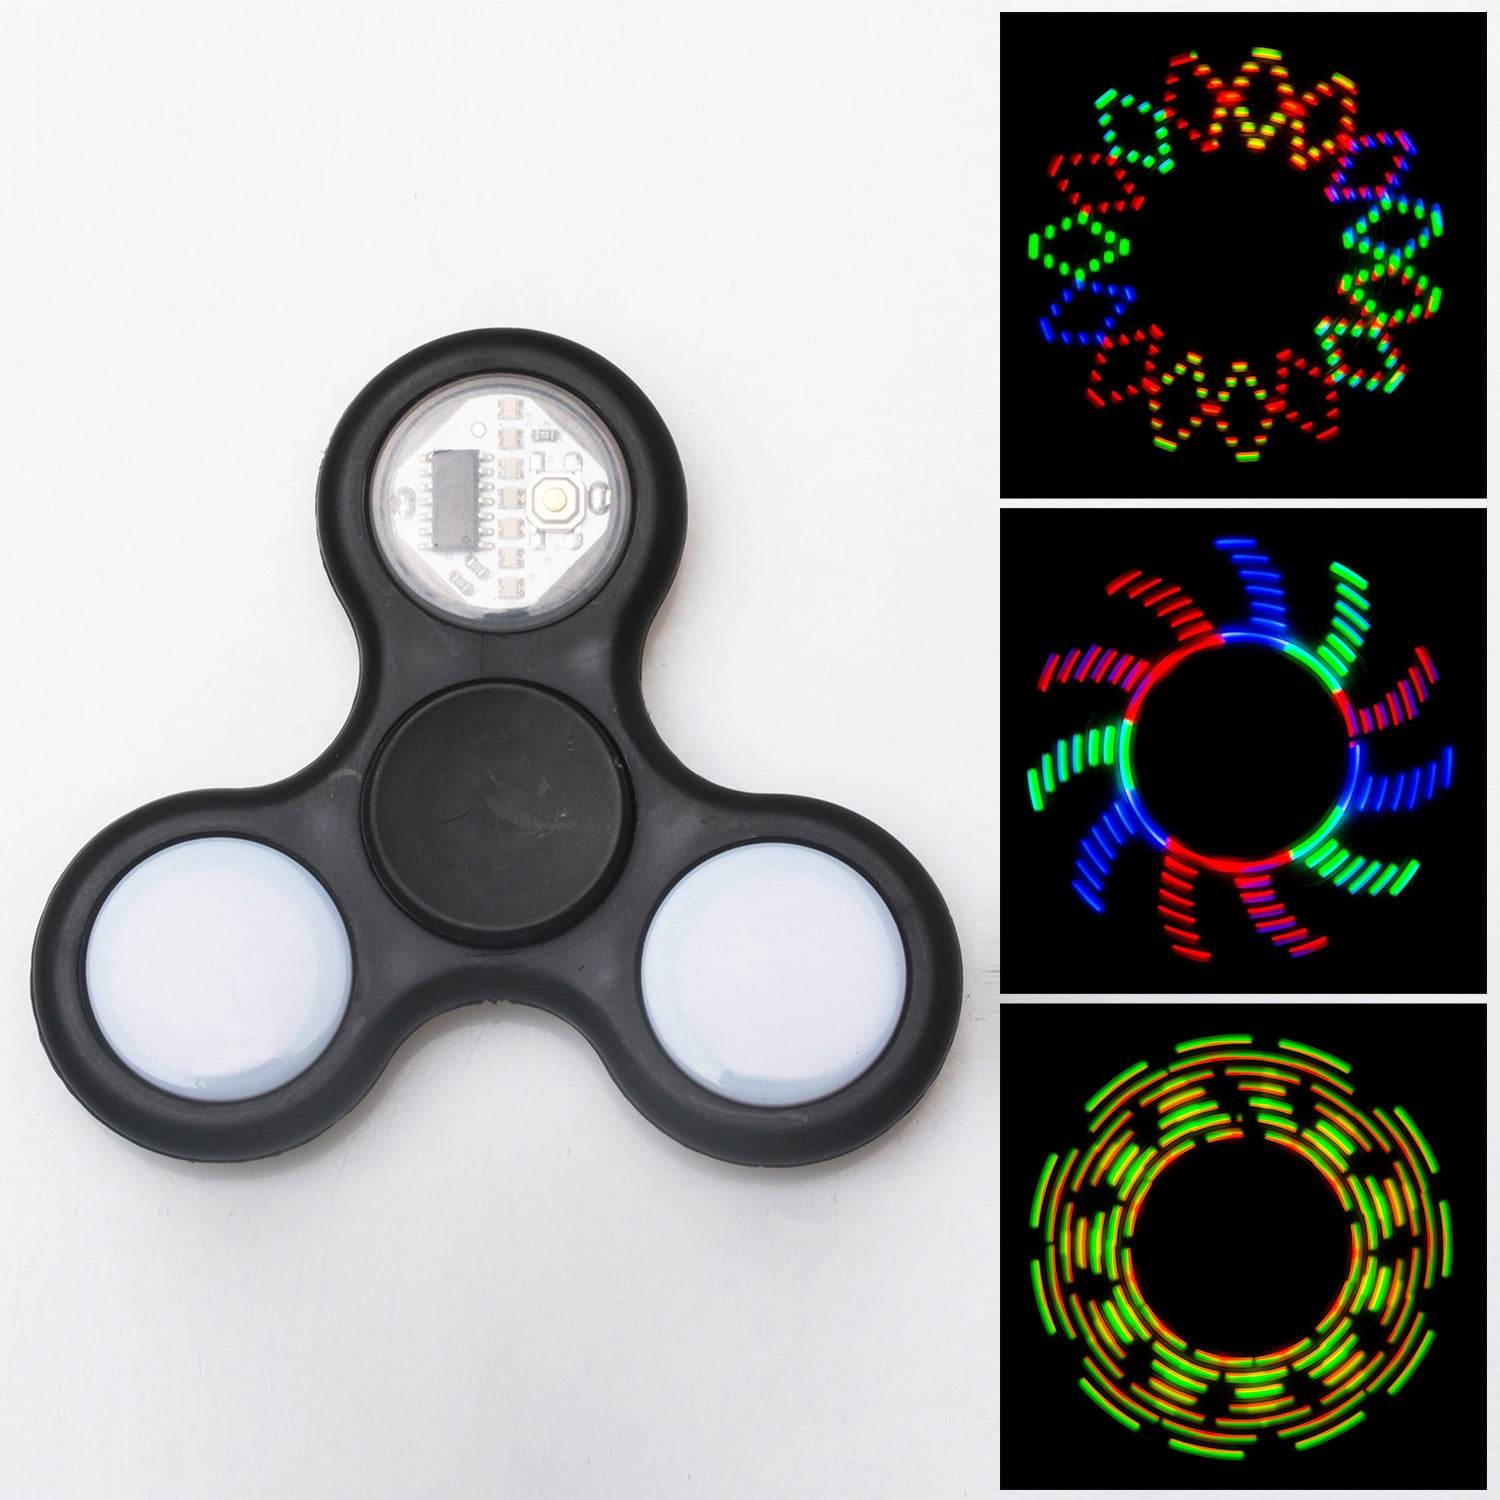 Stress Relief Tri Finger Cross Metal Star Spinner EDC Kid Adult Toy Multi-color